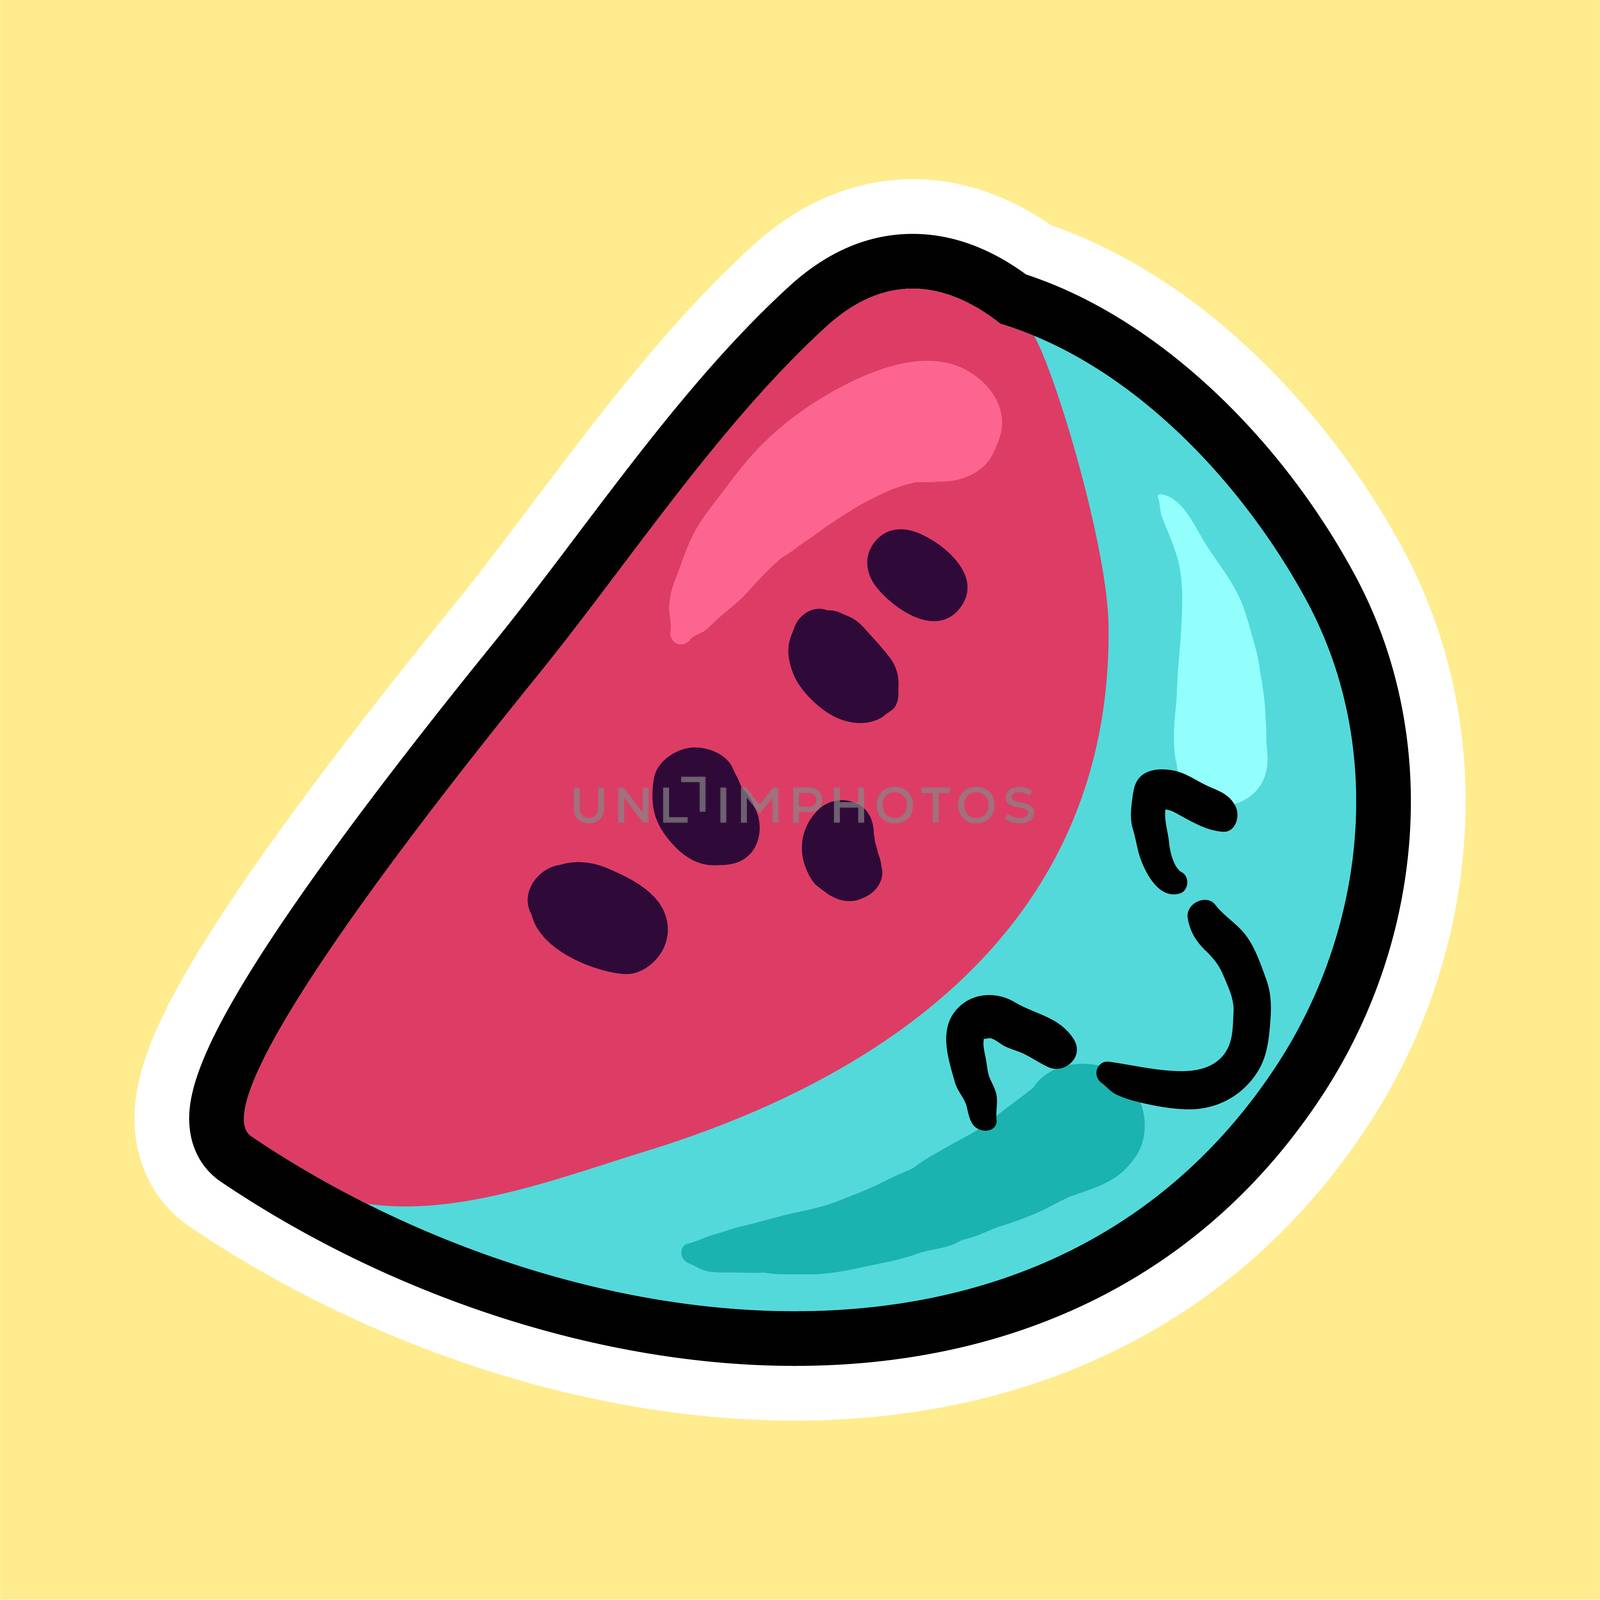 Watermelon cartoon sticker with smile. Sweet fruit label. Patch and print for t-shirt, fabric, clothes. Menu item. Juice and summer symbol. Vector